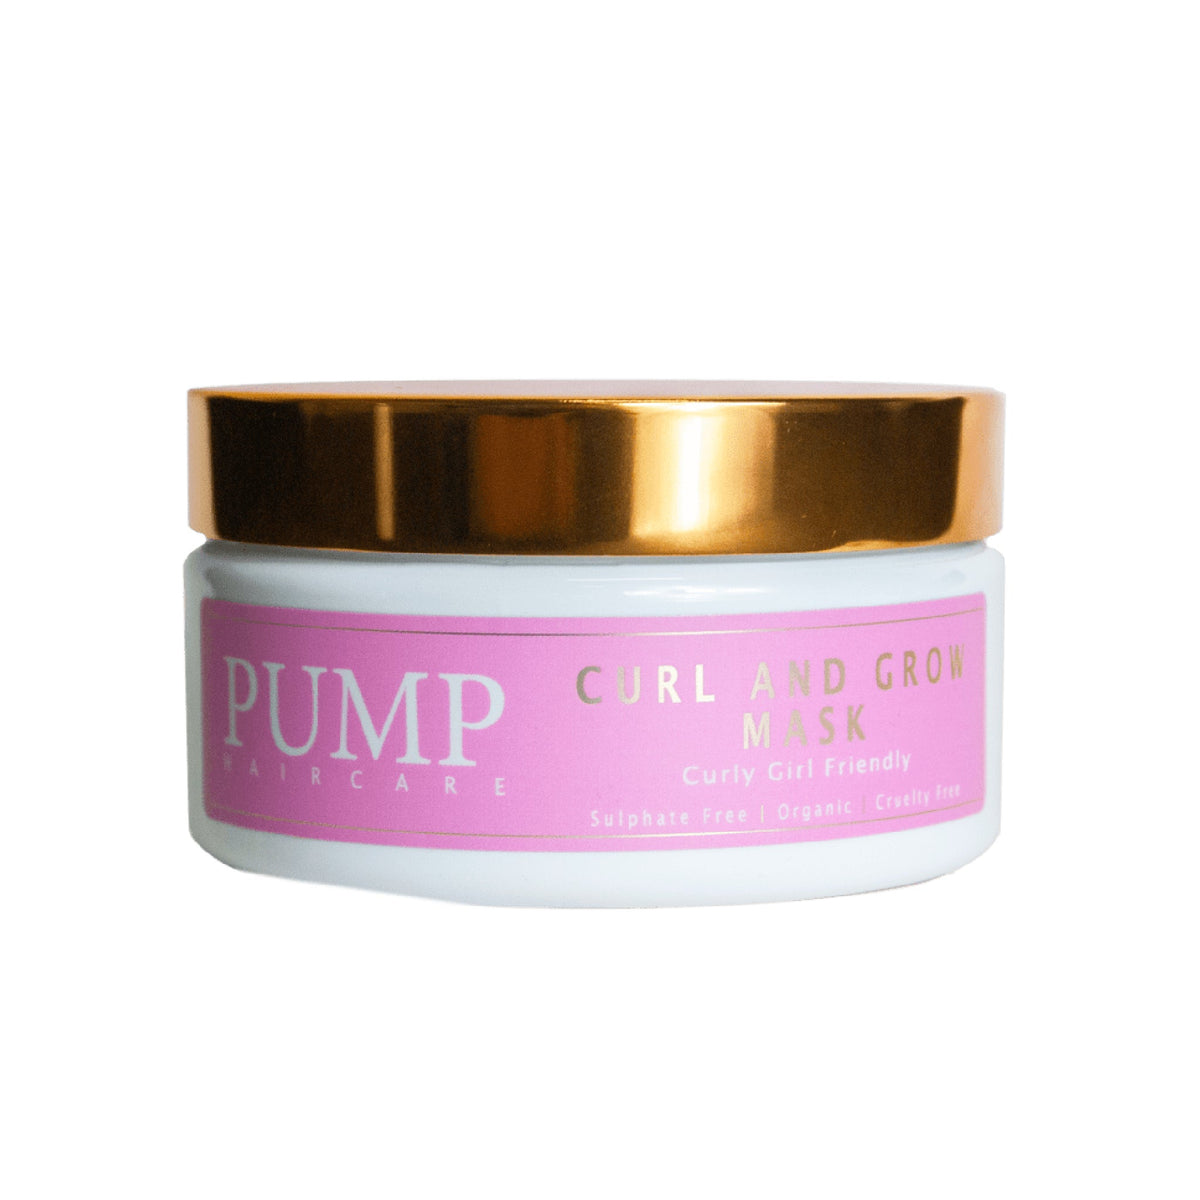 Pump Curl And Grow Mask - Haircare Superstore